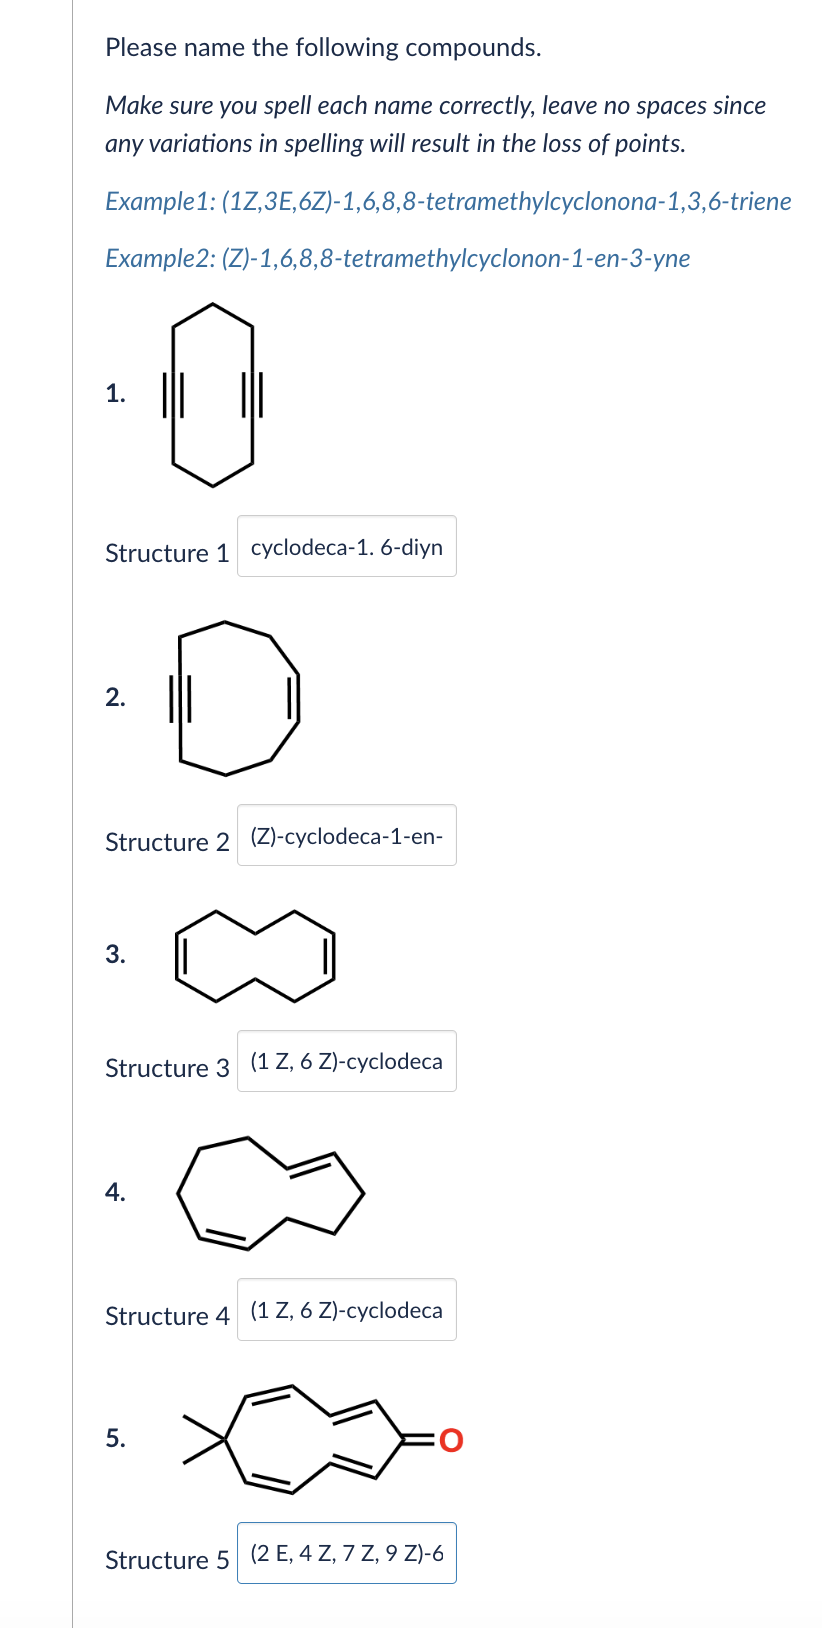 Please name the following compounds.
Make sure you spell each name correctly, leave no spaces since
any variations in spelling will result in the loss of points.
Example 1: (1Z,3E,6Z)-1,6,8,8-tetramethylcyclonona-1,3,6-triene
Example2: (Z)-1,6,8,8-tetramethylcyclonon-1-en-3-yne
1.
Structure 1 cyclodeca-1. 6-diyn
2.
D
Structure 2 (Z)-cyclodeca-1-en-
3.
Structure 3 (1 Z, 6 Z)-cyclodeca
4.
Structure 4 (1 Z, 6 Z)-cyclodeca
5.
Structure 5 (2 E, 4 Z, 7 Z, 9 Z)-6